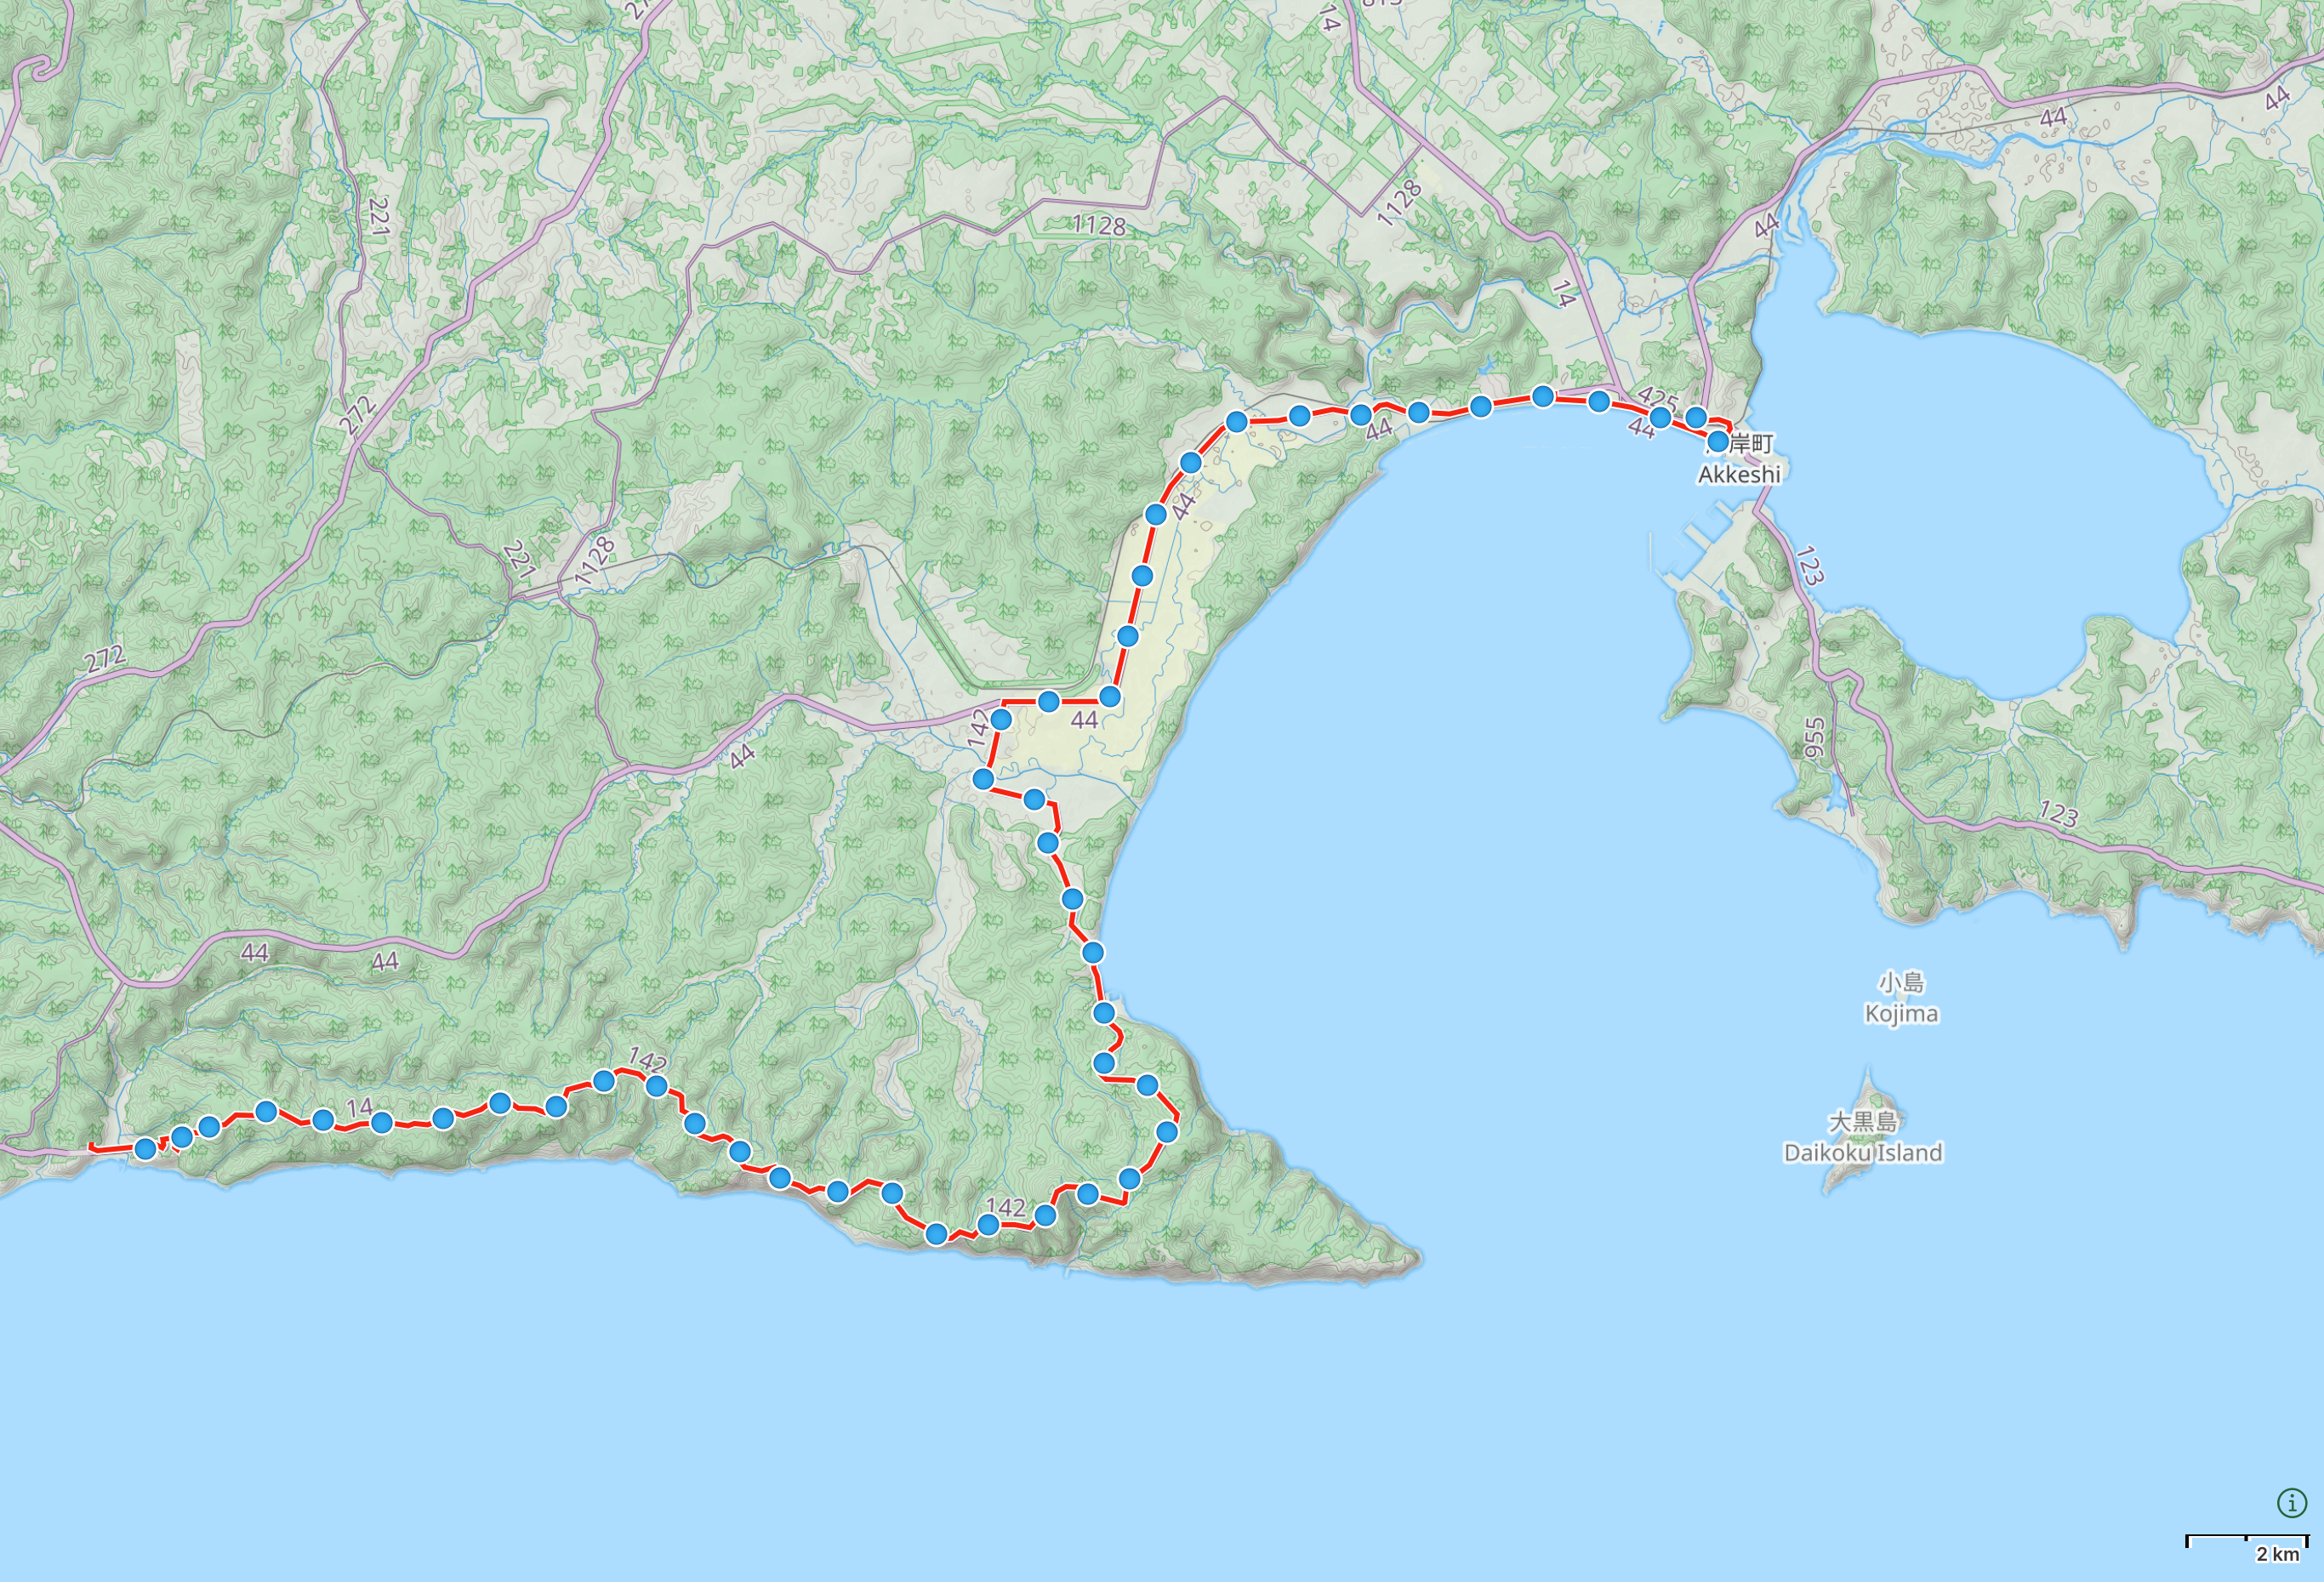 Map of Hokkaido with author’s route from Konbumori to Akkeshi highlighted.